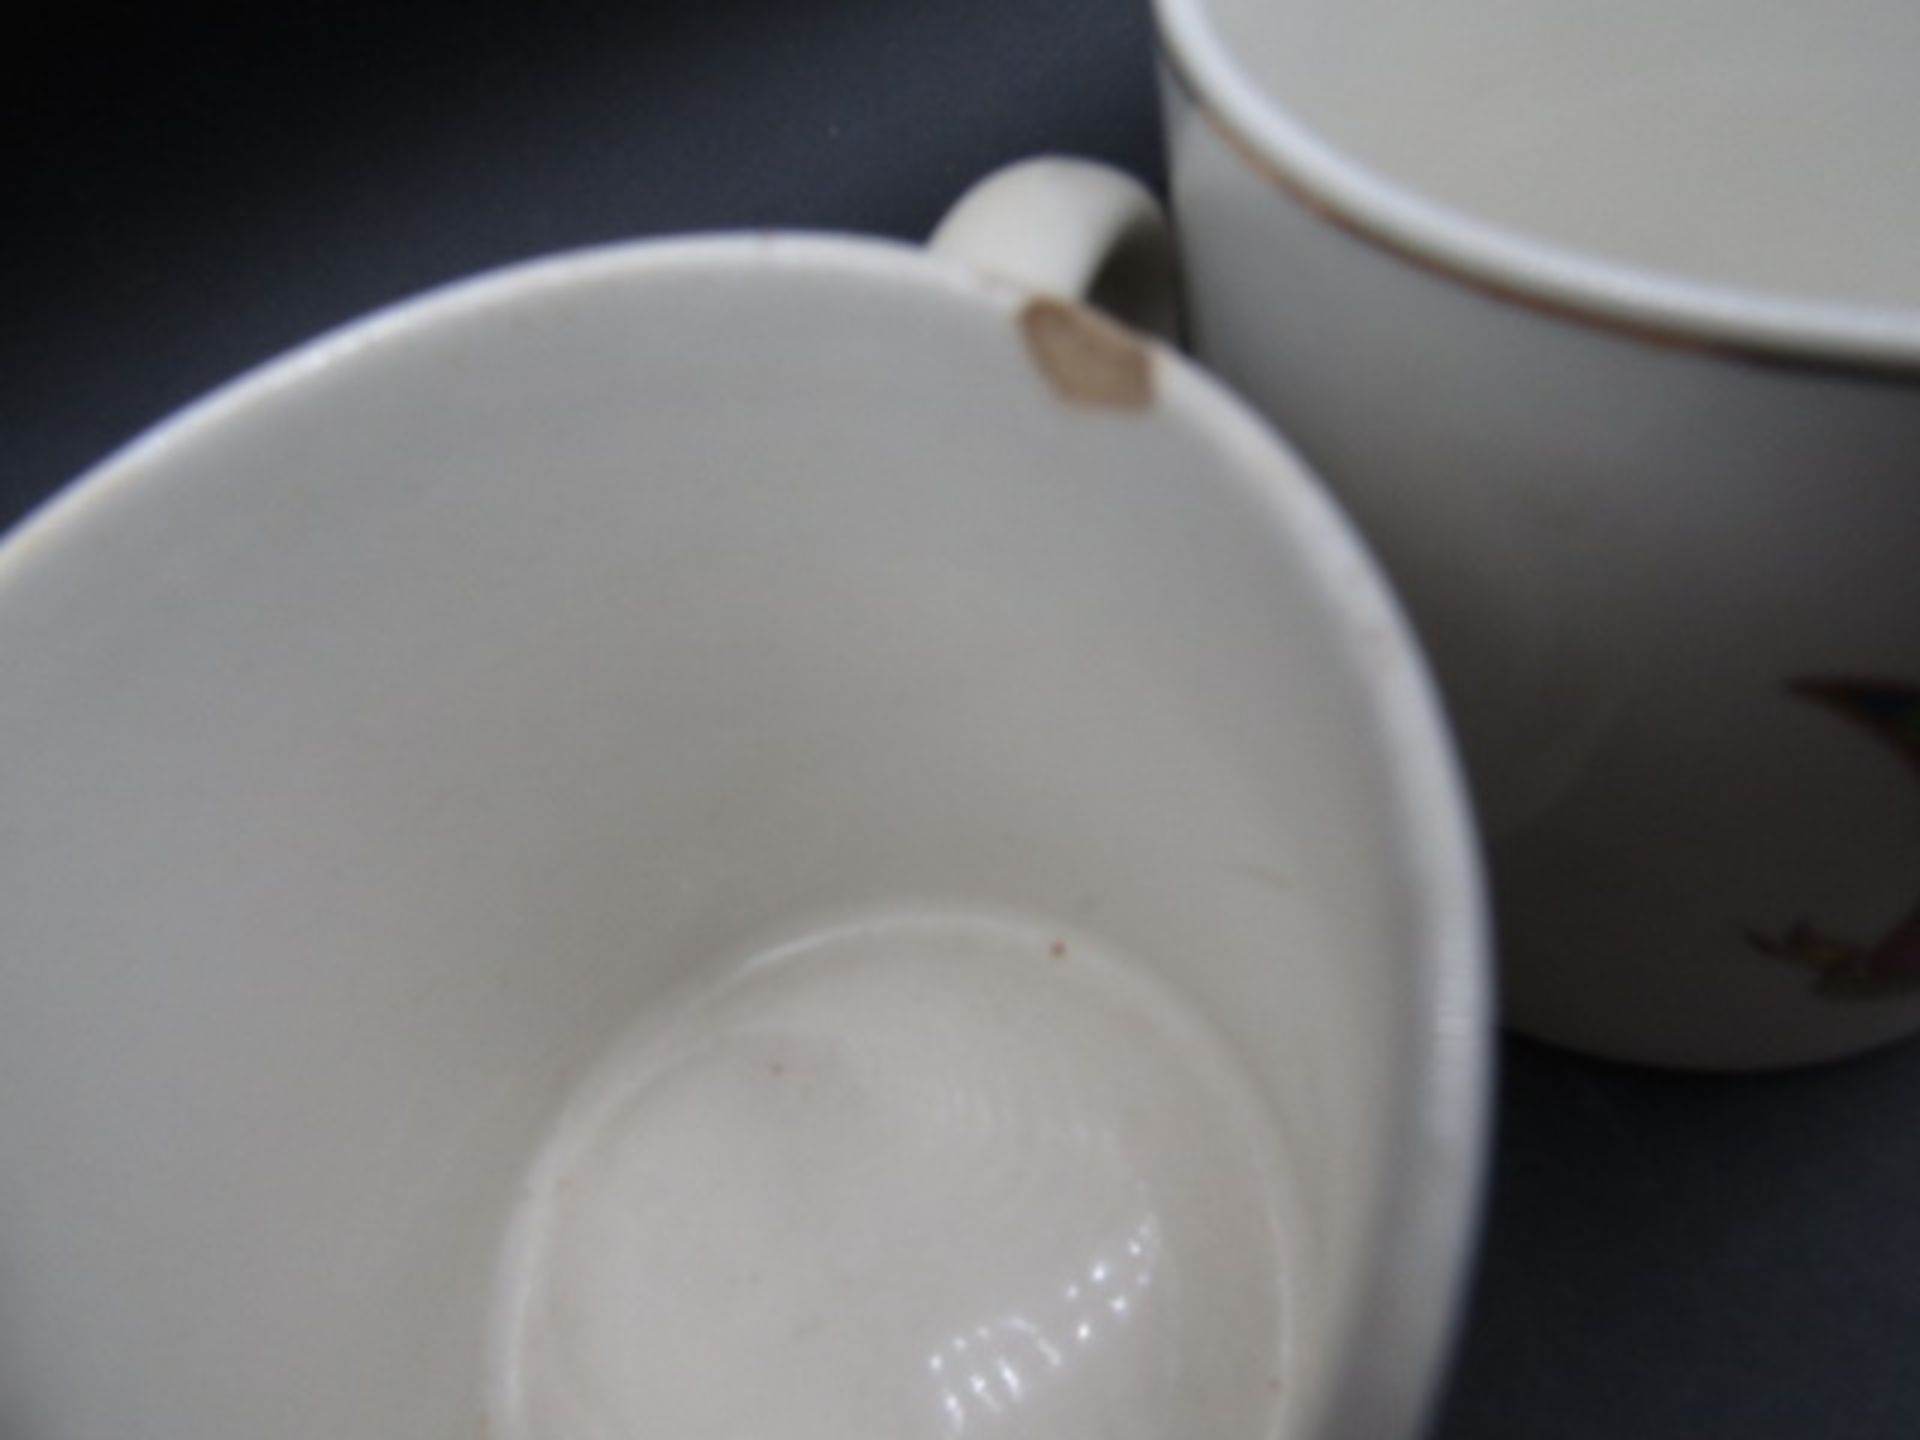 Commemorative mugs and glass dish  one cup is cracked, one has large chip as pictured - Image 3 of 7